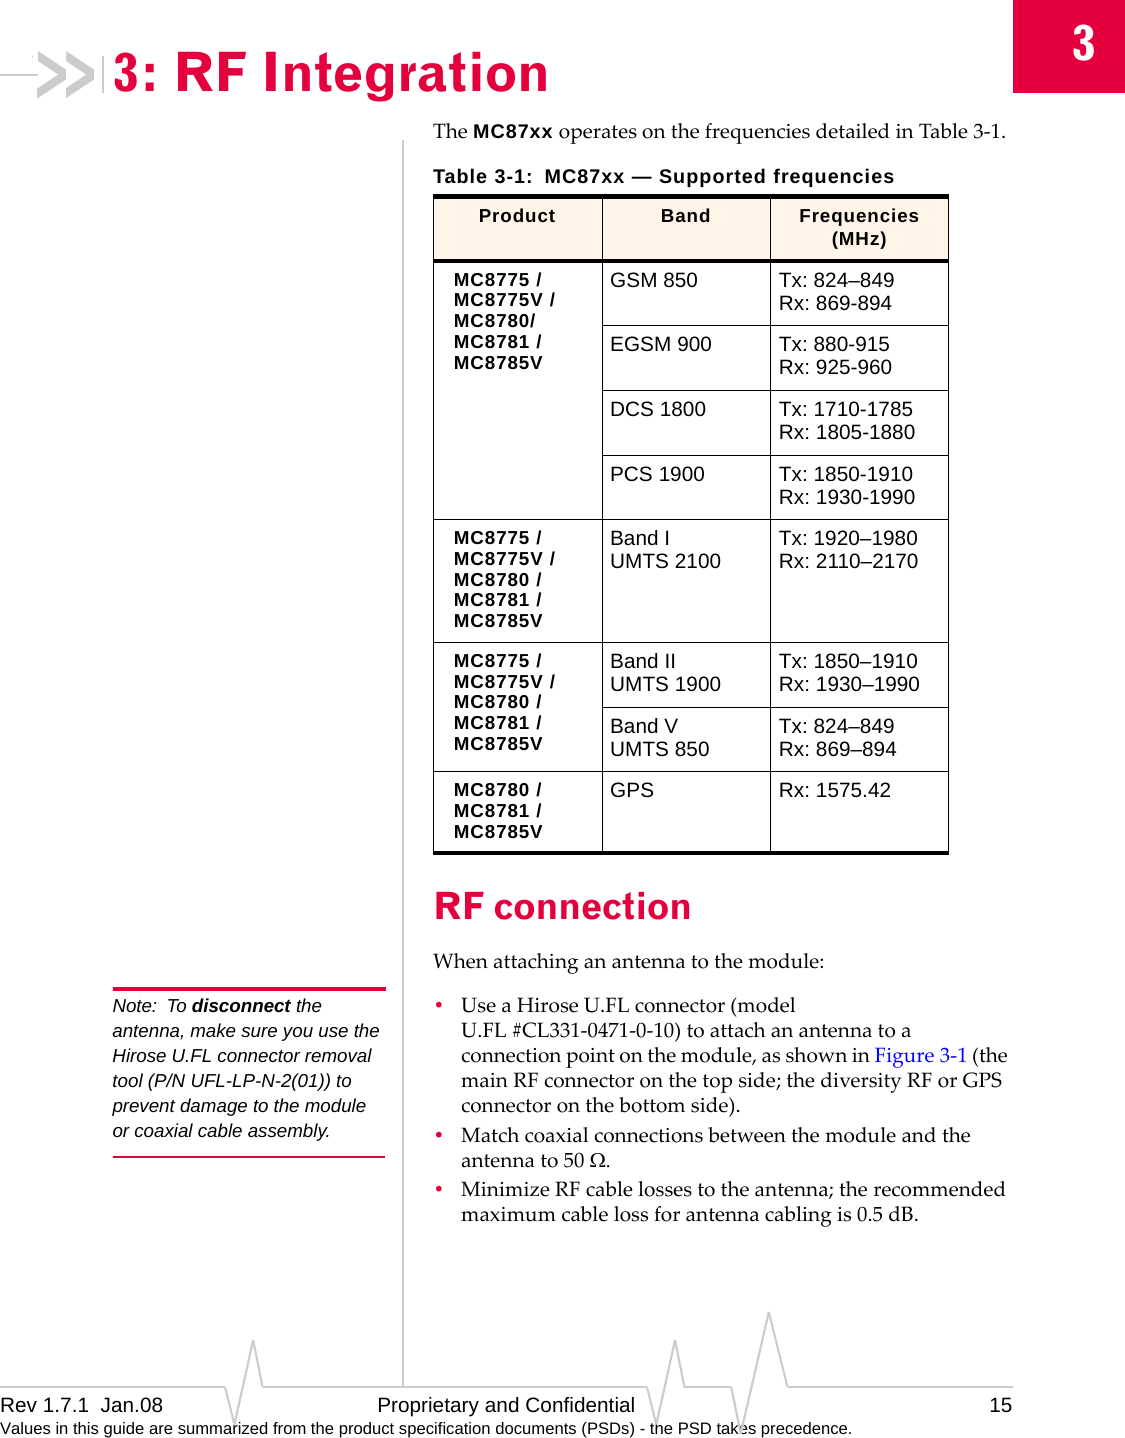 3Rev 1.7.1  Jan.08 Proprietary and Confidential 15Values in this guide are summarized from the product specification documents (PSDs) - the PSD takes precedence.3: RF IntegrationTheMC87xxoperatesonthefrequenciesdetailedinTable3‐1.RF connectionWhenattachinganantennatothemodule:Note: To disconnect the antenna, make sure you use the Hirose U.FL connector removal tool (P/N UFL-LP-N-2(01)) to prevent damage to the module or coaxial cable assembly.•UseaHiroseU.FLconnector(modelU.FL#CL331‐0471‐0‐10)toattachanantennatoaconnectionpointonthemodule,asshowninFigure3‐1(themainRFconnectoronthetopside;thediversityRForGPSconnectoronthebottomside).•Matchcoaxialconnectionsbetweenthemoduleandtheantennato50Ω.•MinimizeRFcablelossestotheantenna;therecommendedmaximumcablelossforantennacablingis0.5dB.Table 3-1: MC87xx — Supported frequenciesProduct Band Frequencies (MHz)MC8775 /MC8775V /MC8780/MC8781 /MC8785VGSM 850 Tx: 824–849 Rx: 869-894EGSM 900 Tx: 880-915 Rx: 925-960DCS 1800 Tx: 1710-1785 Rx: 1805-1880PCS 1900 Tx: 1850-1910 Rx: 1930-1990MC8775 /MC8775V /MC8780 /MC8781 /MC8785VBand I UMTS 2100 Tx: 1920–1980 Rx: 2110–2170MC8775 /MC8775V /MC8780 /MC8781 /MC8785VBand II UMTS 1900 Tx: 1850–1910 Rx: 1930–1990Band V UMTS 850 Tx: 824–849 Rx: 869–894MC8780 /MC8781 /MC8785VGPS Rx: 1575.42